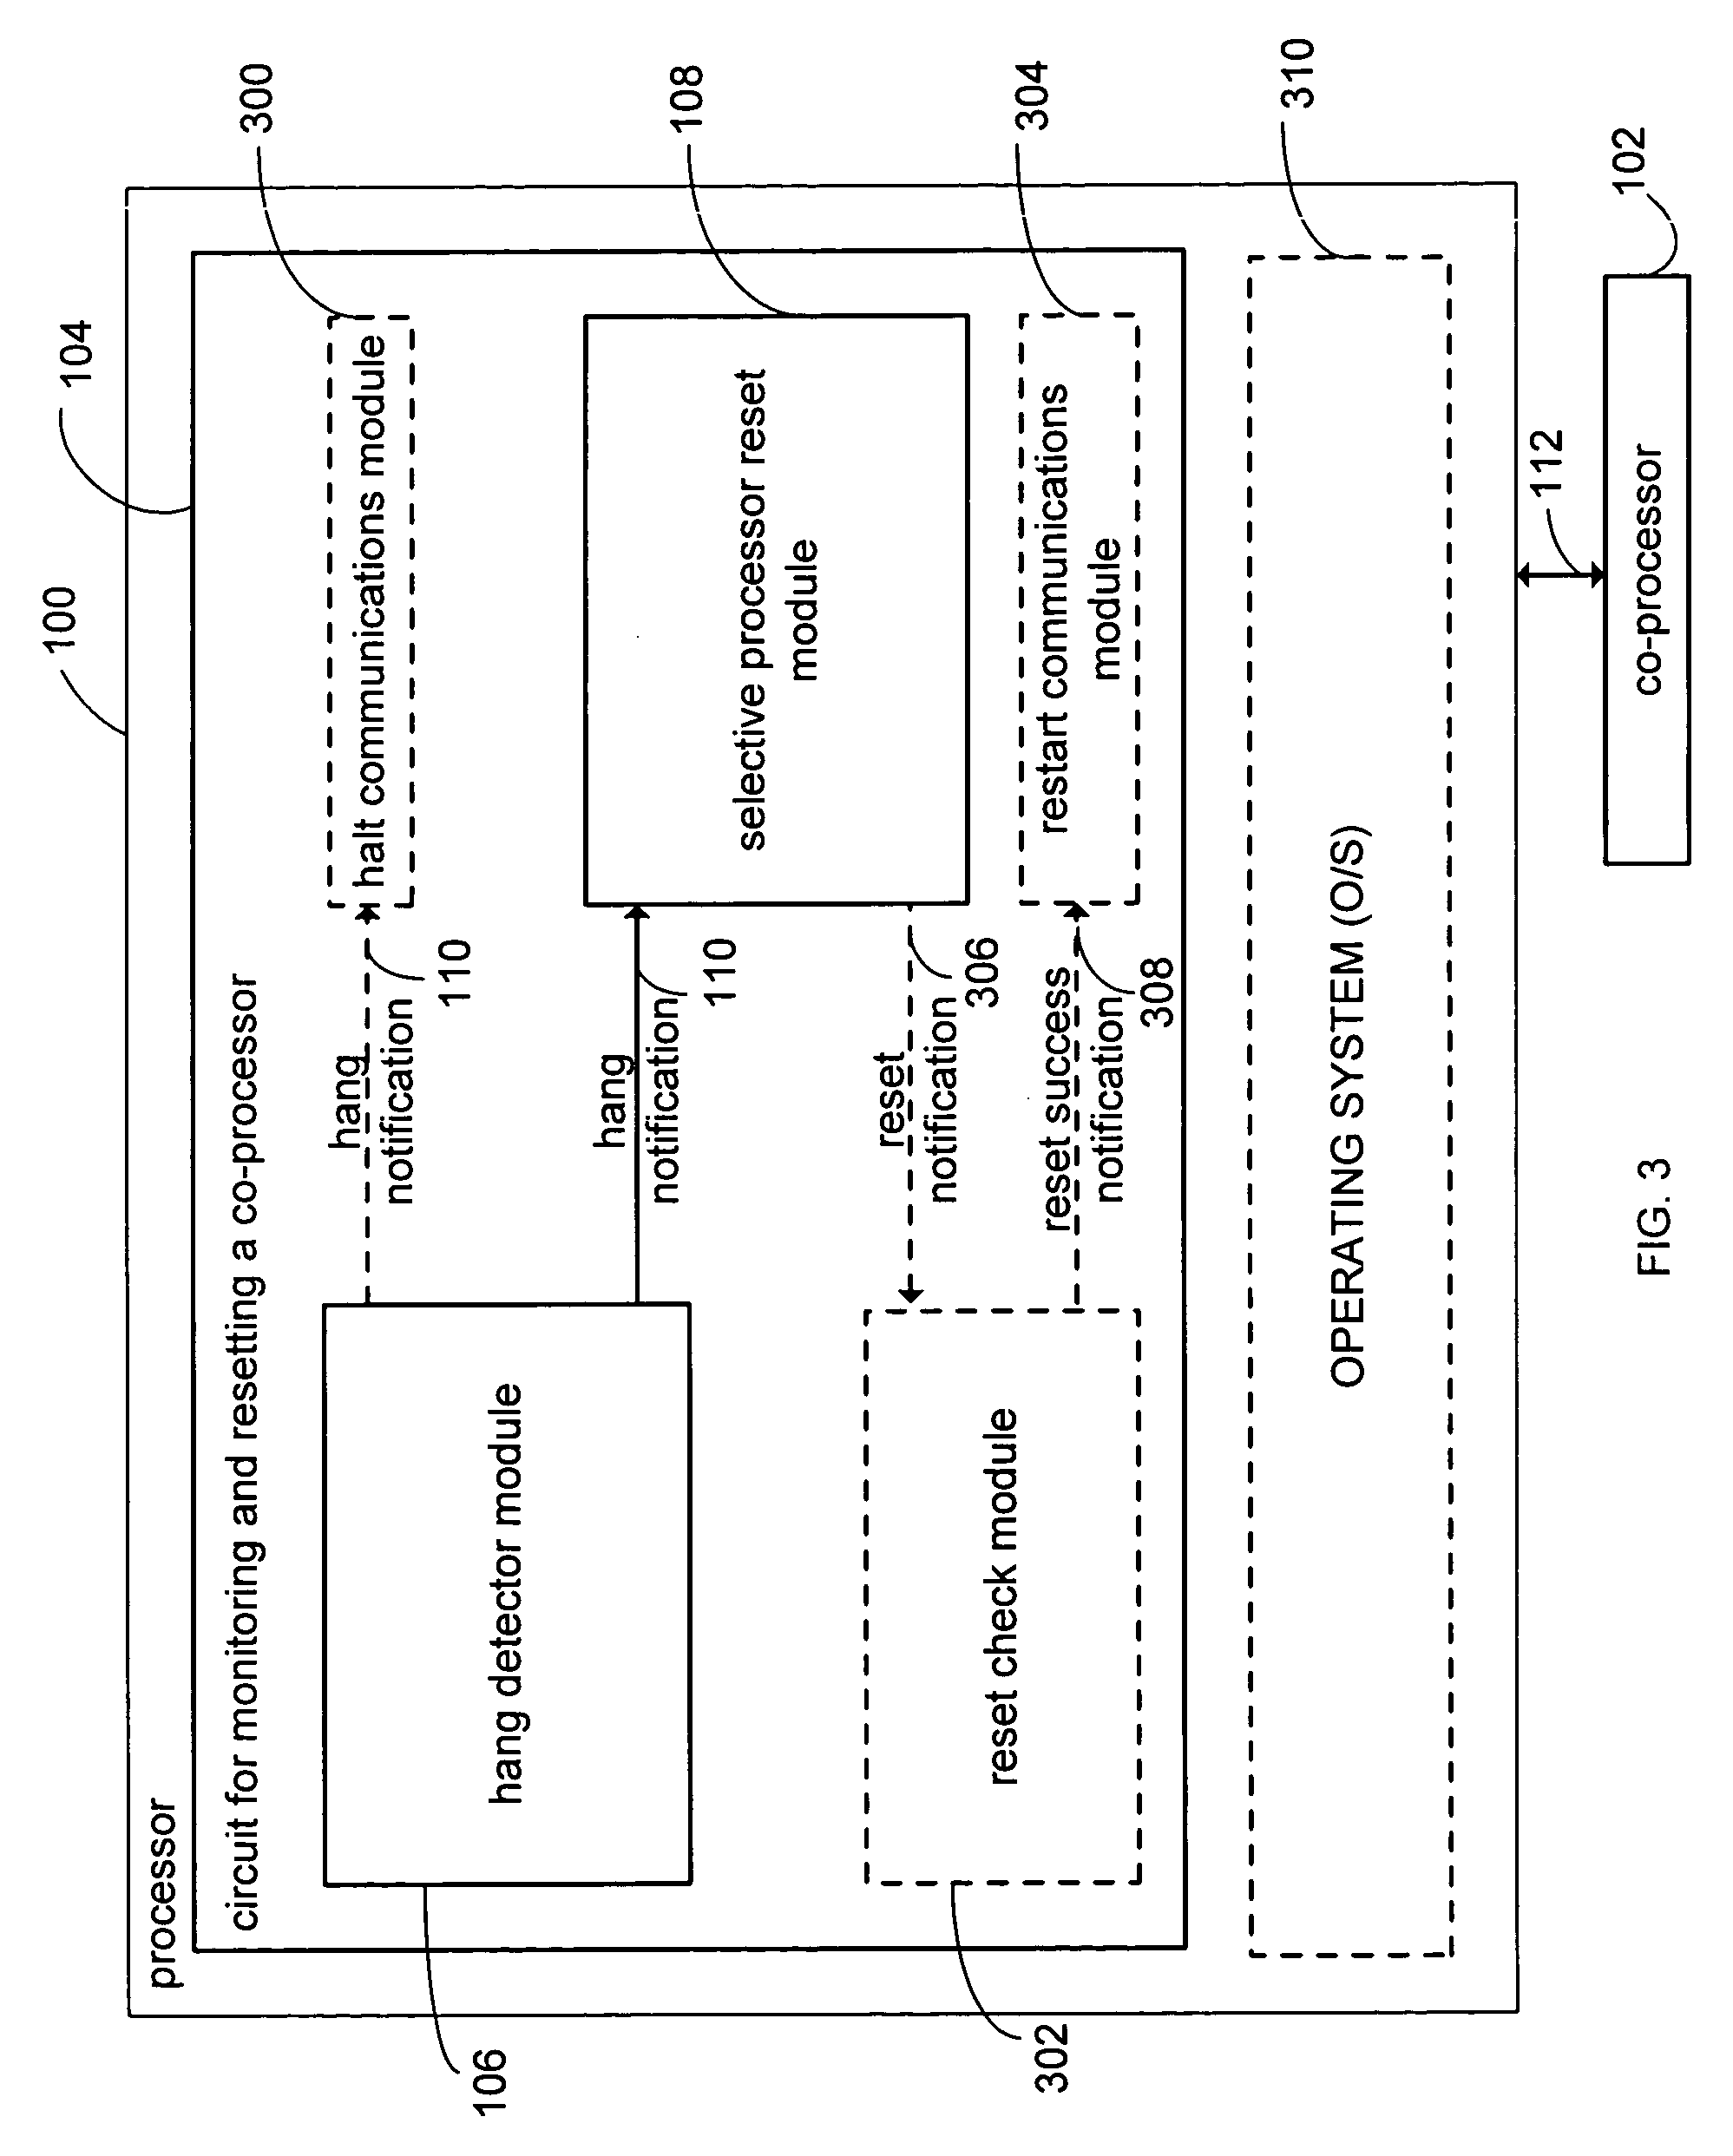 Method and apparatus for monitoring and resetting a co-processor